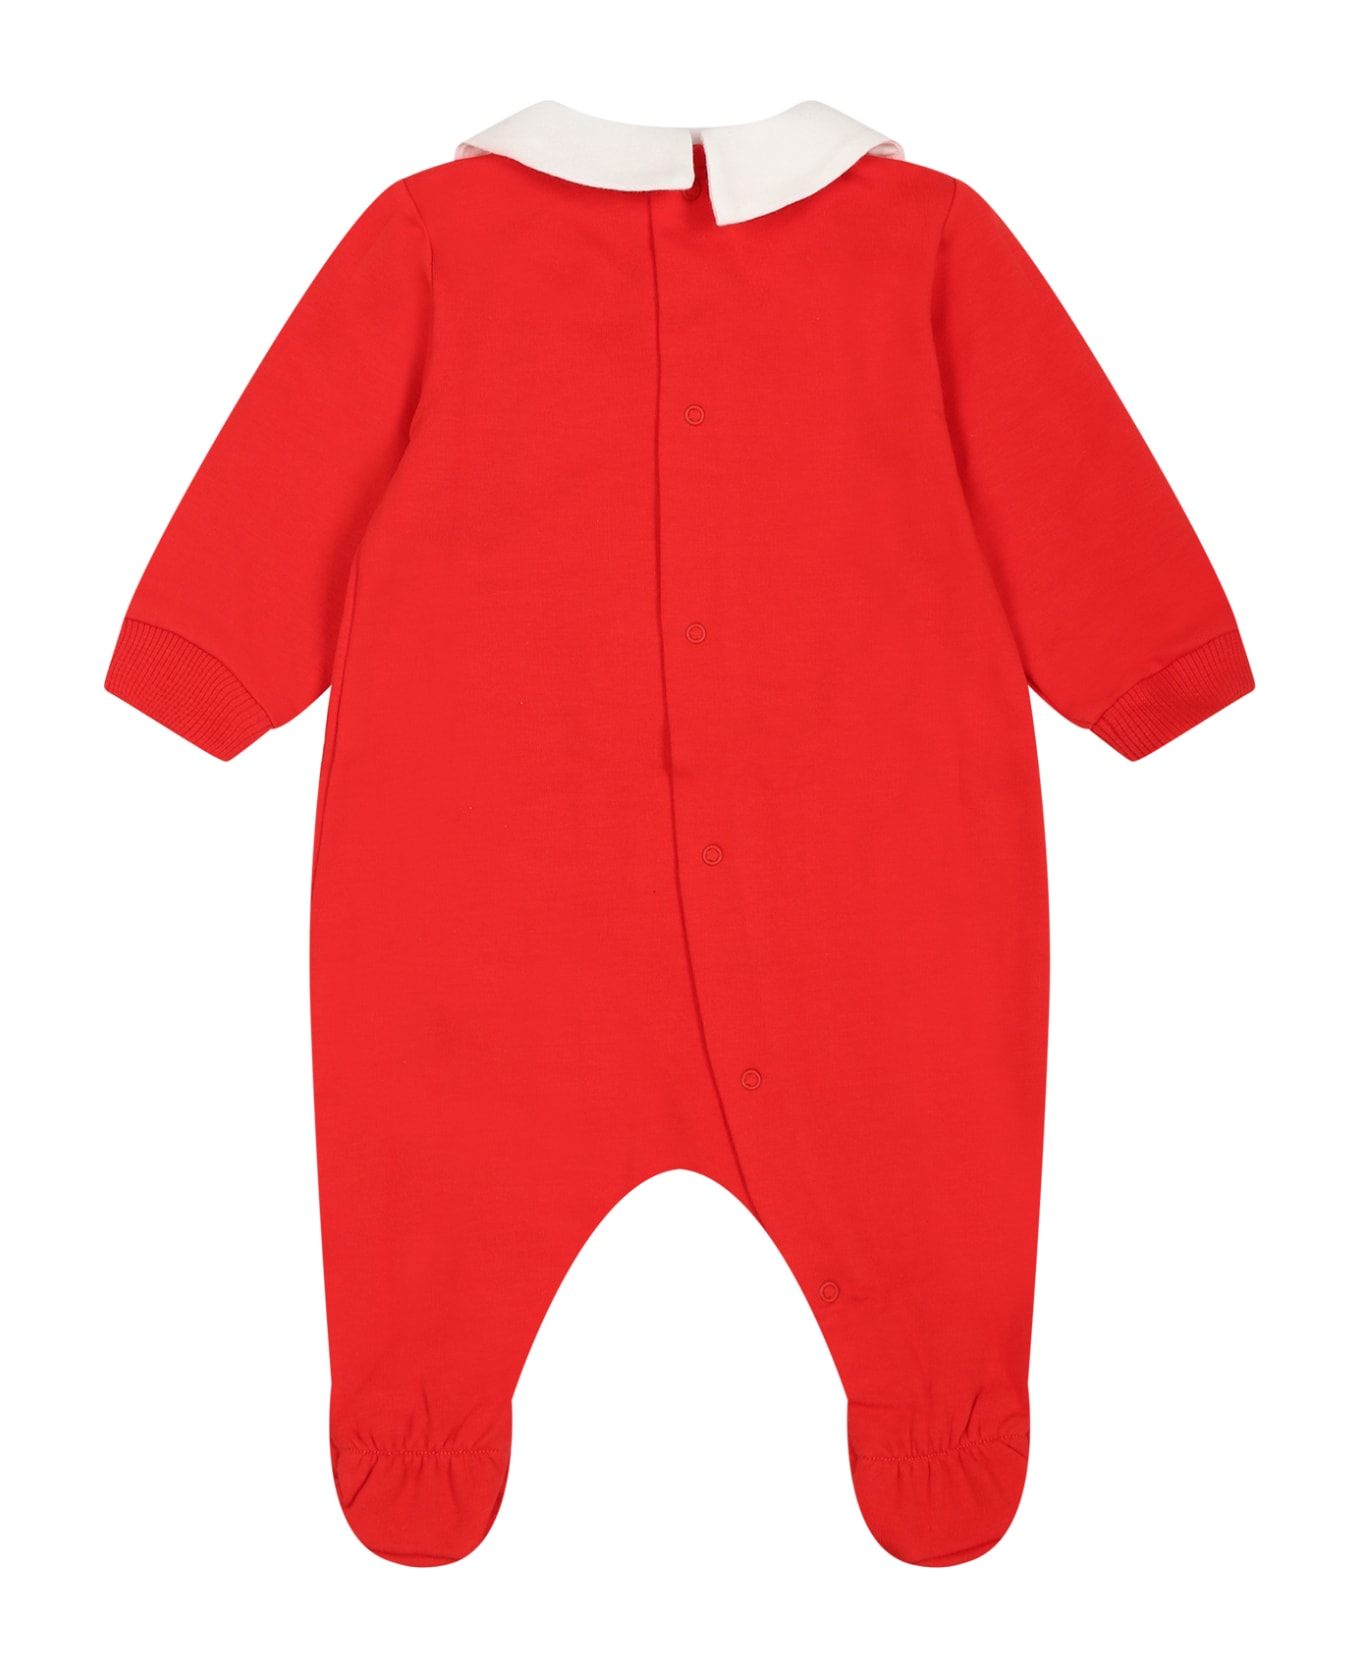 Moschino Red Babygrow For Baby Kids With Teddy Bear - Red